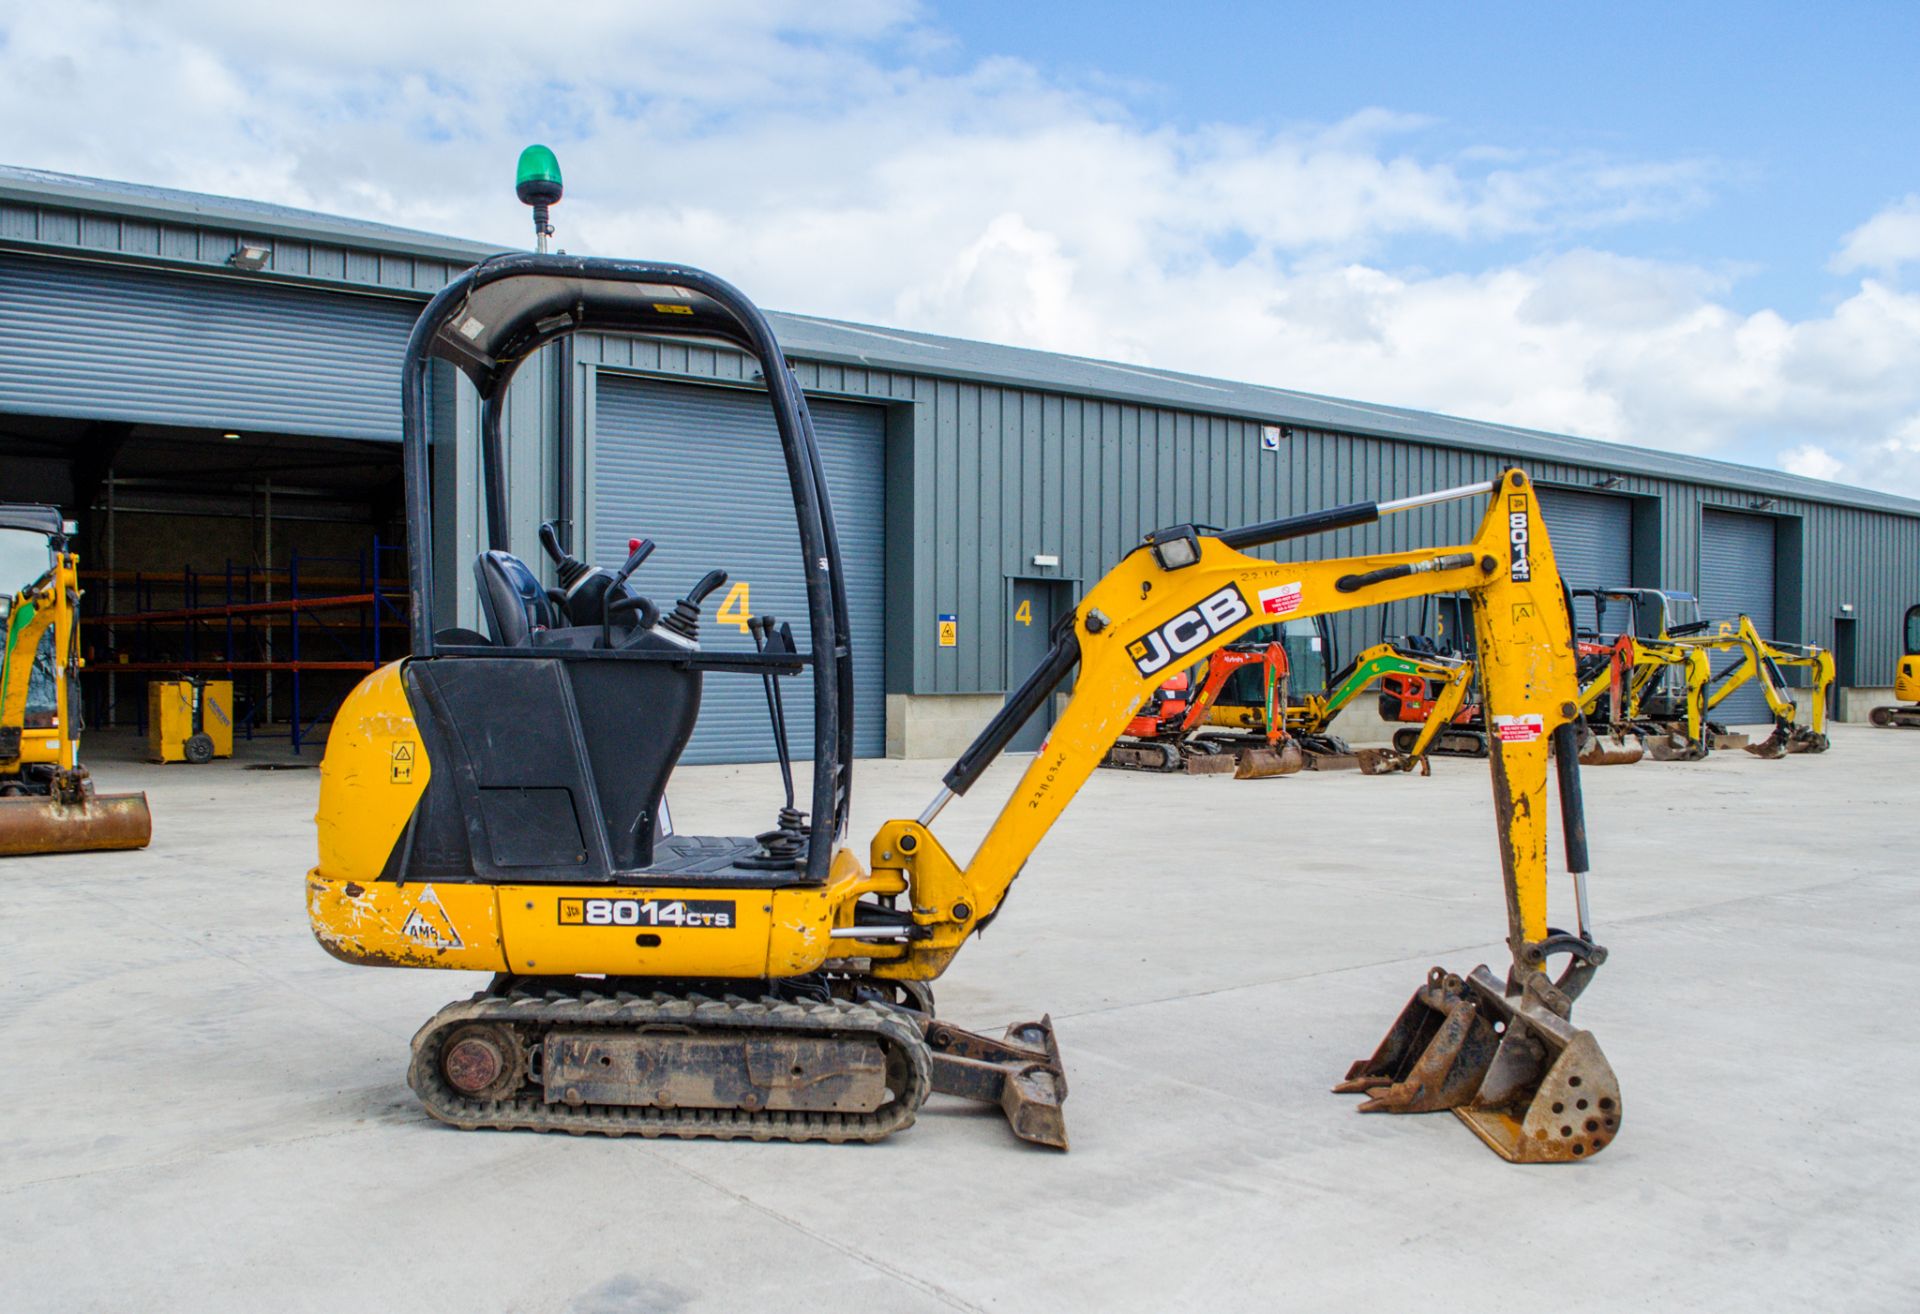 JCB 8014 CTS 1.4 tonne rubber tracked mini excavator Year: 2015 S/N: 70995 Recorded Hours: 1812 - Image 8 of 22